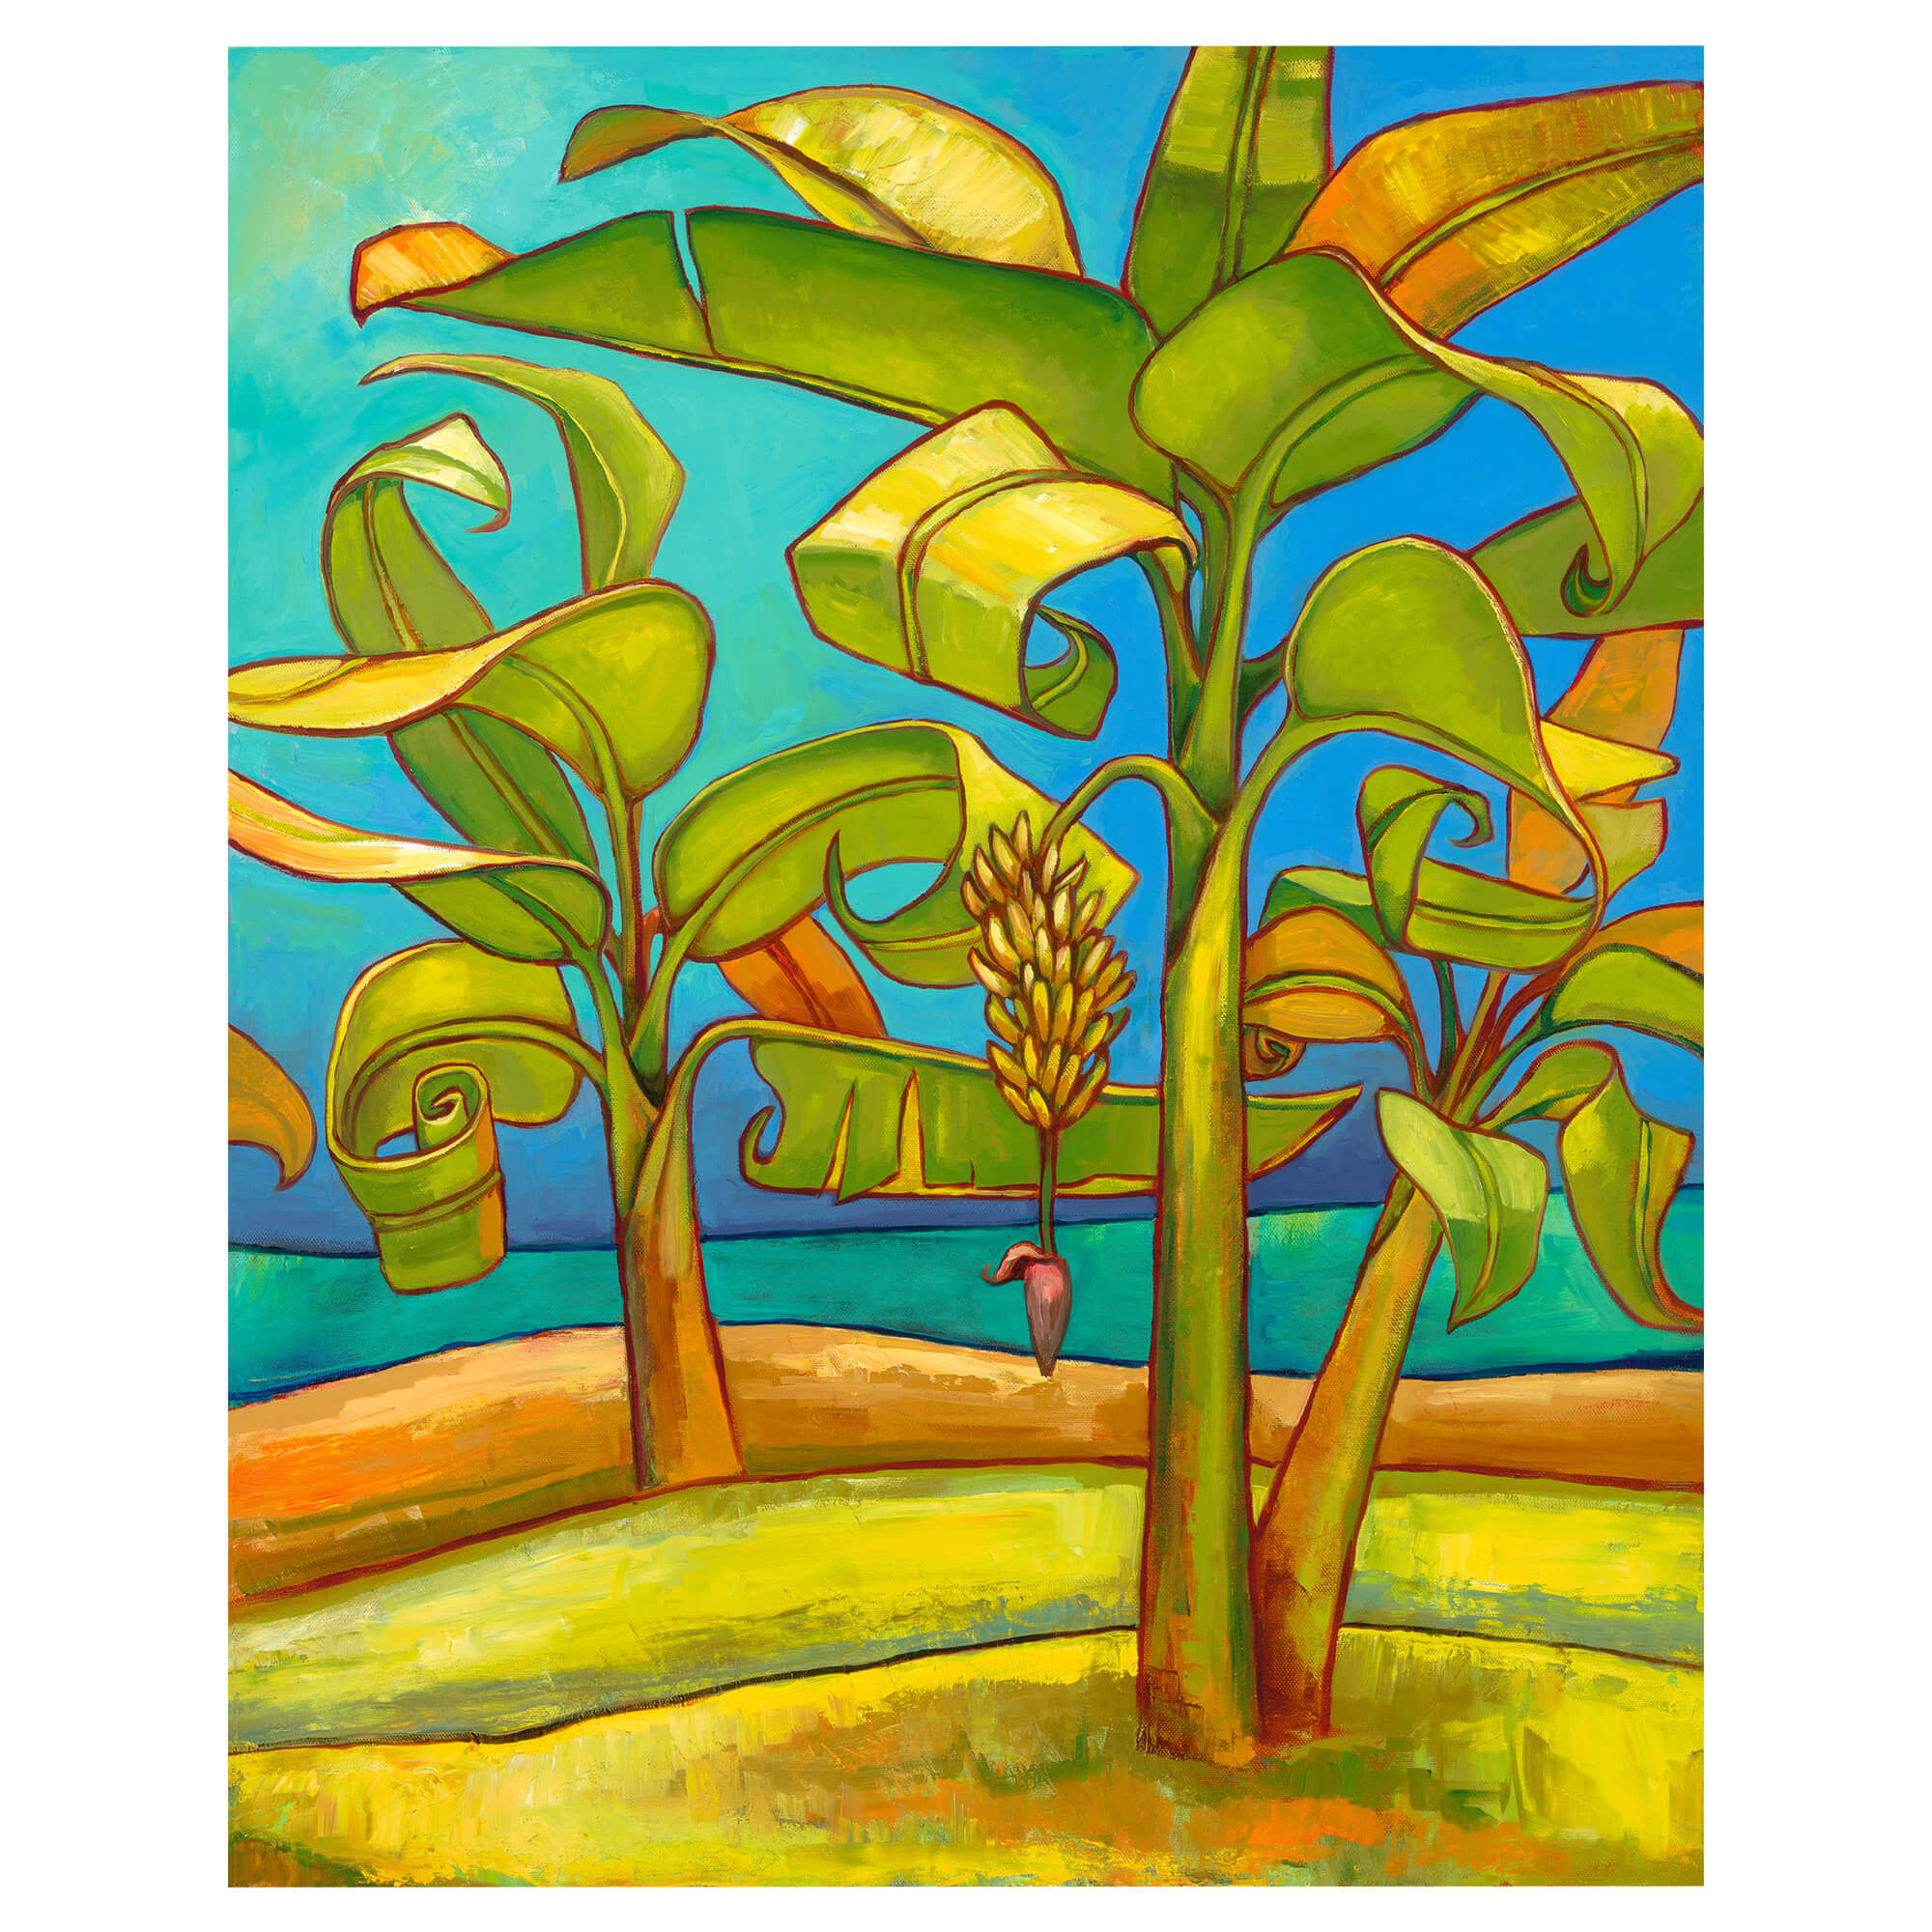 A creative depiction of banana trees by Hawaii artist Colin Redican